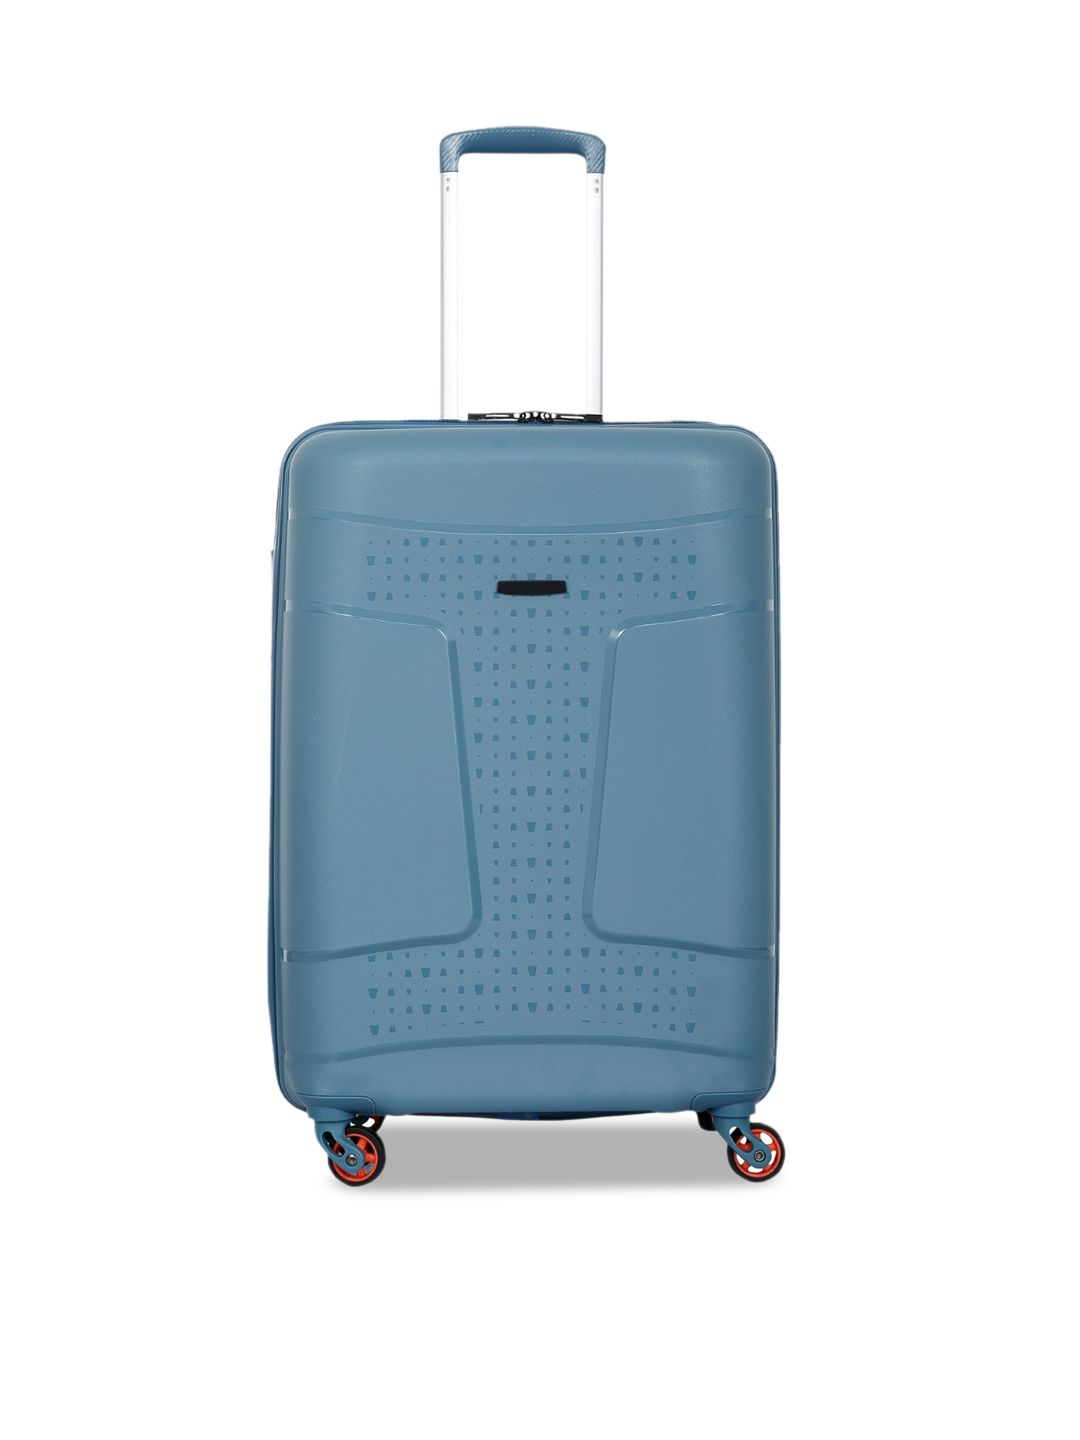 Polo Class Blue Solid Hard-Sided Trolley Suitcase Price in India